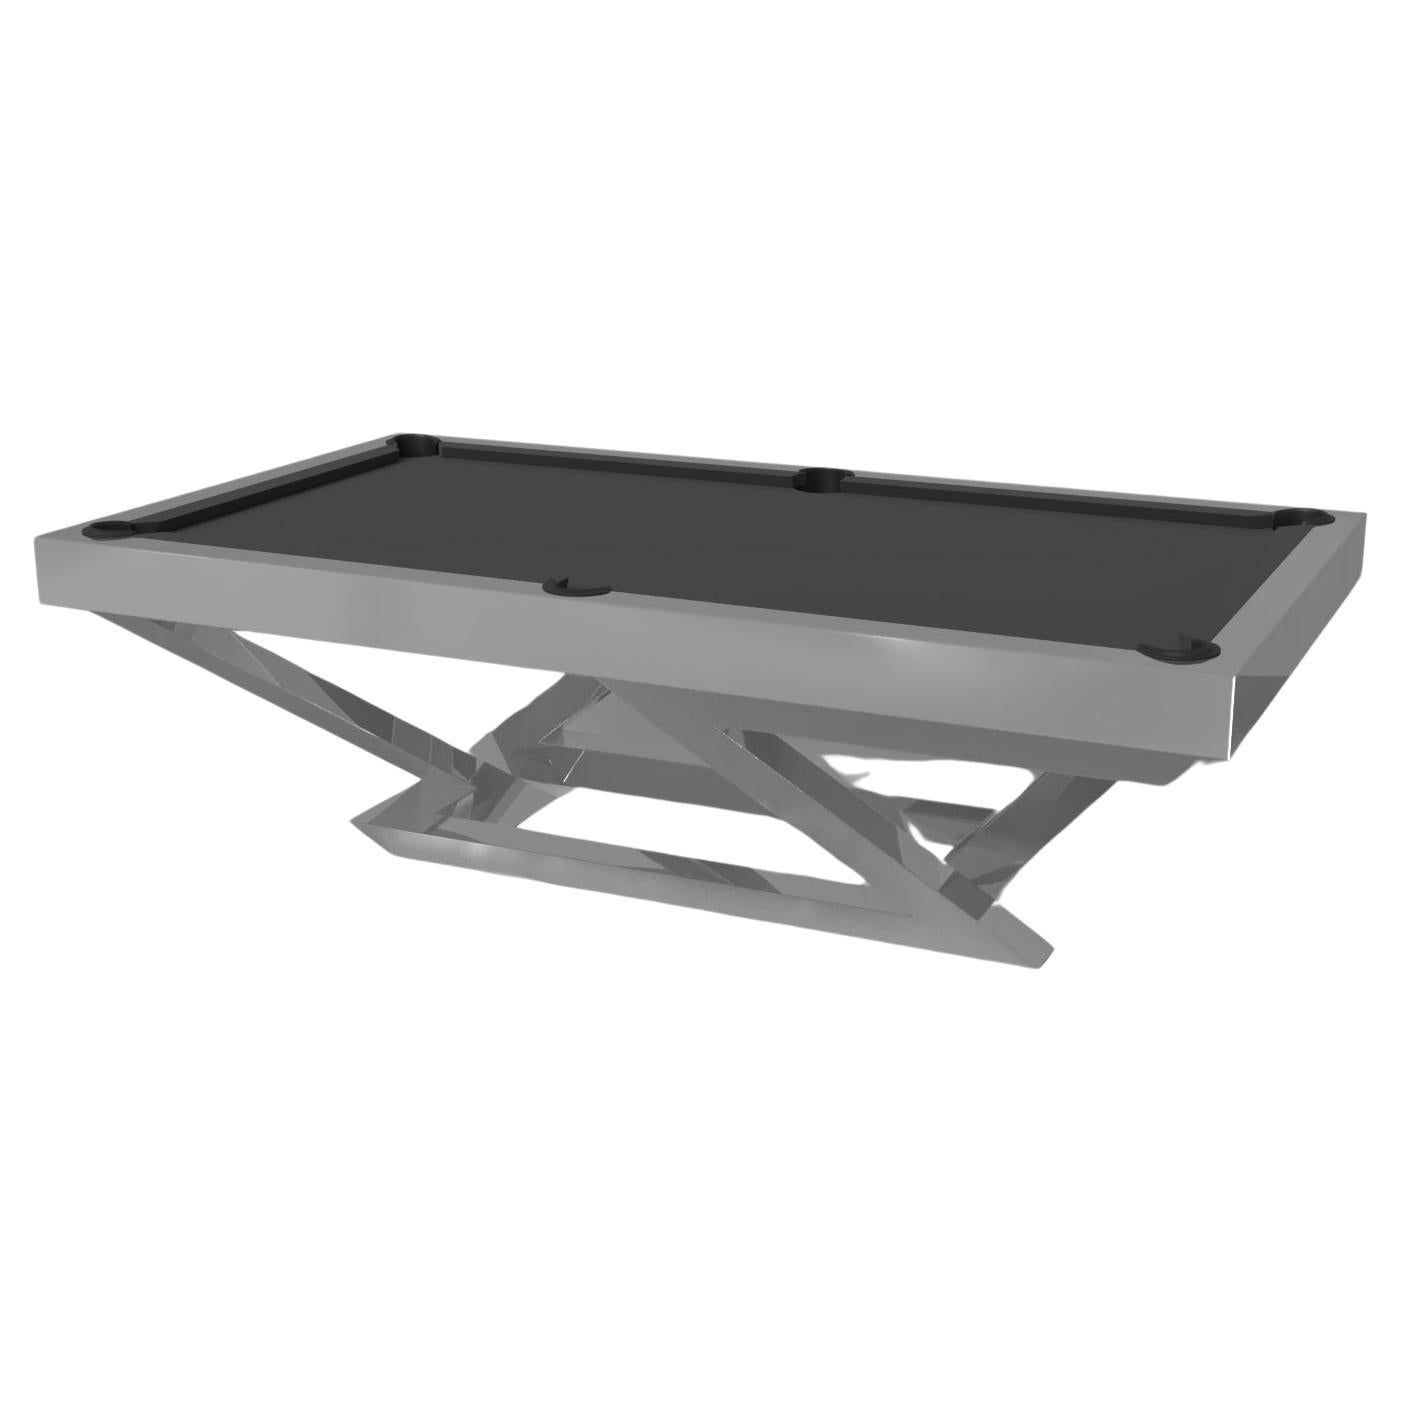 Elevate Customs Trinity Pool Table / Solid Stainless Steel in 9' - Made in USA